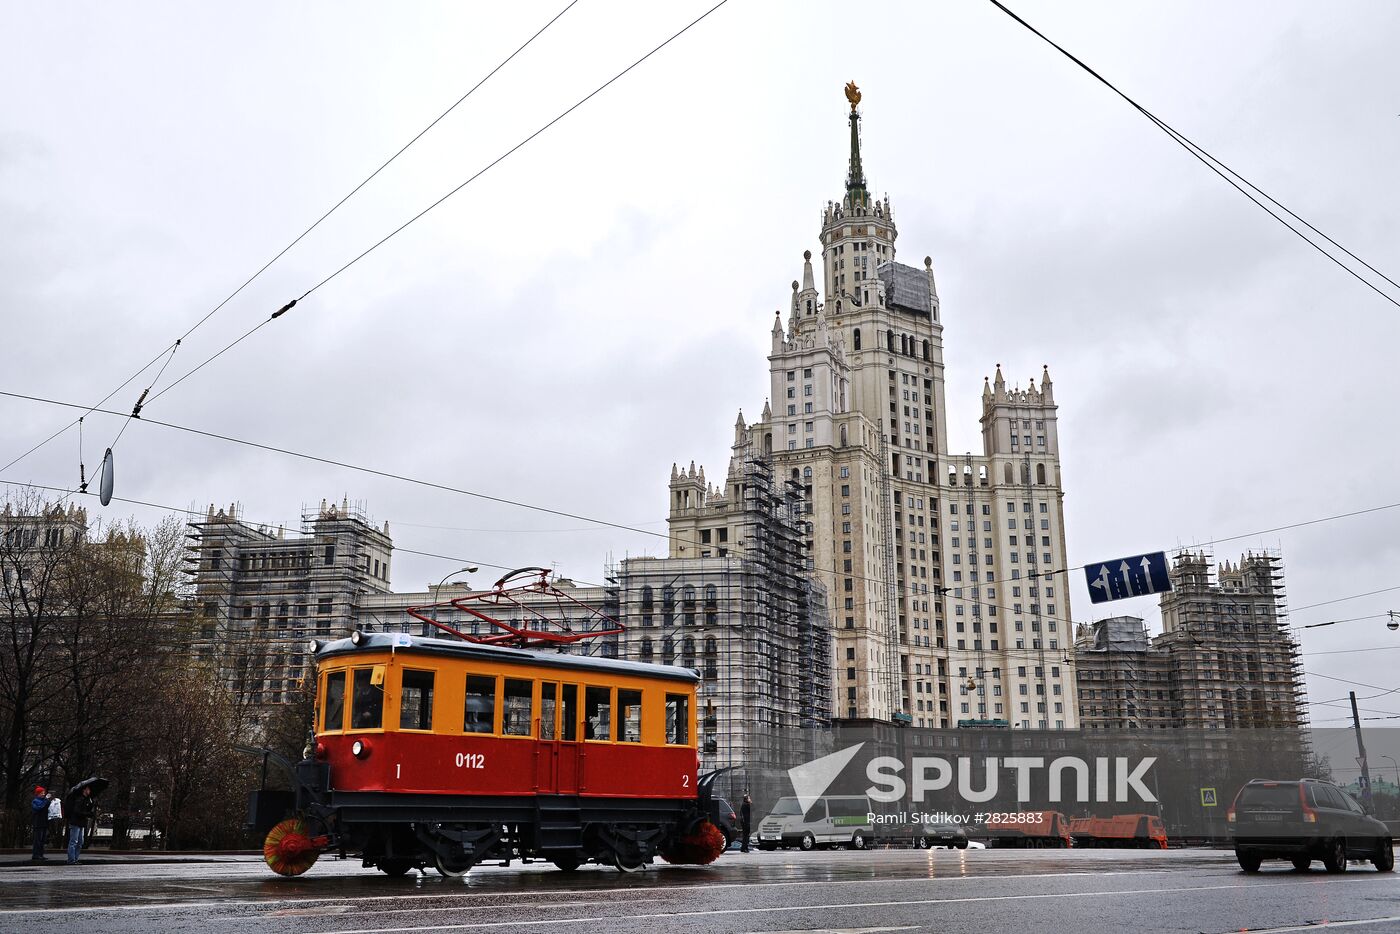 Celebrating Moscow Tram Day on Chistye Prudy